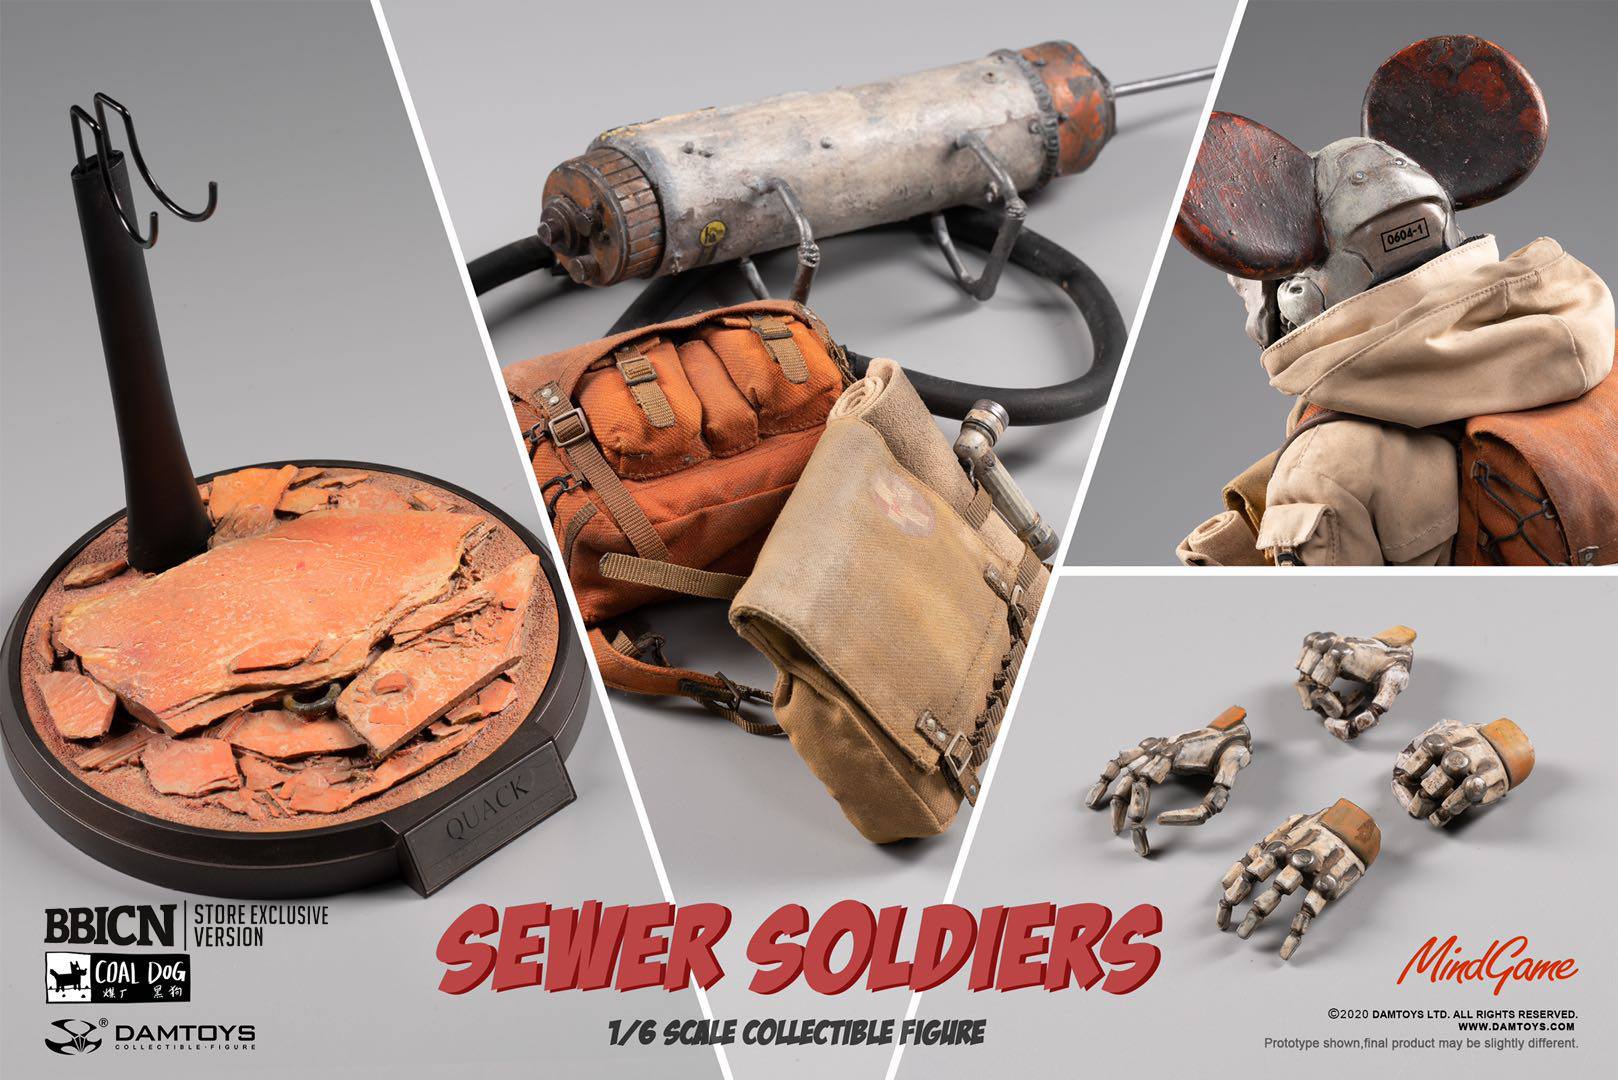 DamToys x Coal Dog - Sewer Soldiers - Quack (MindGames 5th Anniversary) (1/6 Scale)